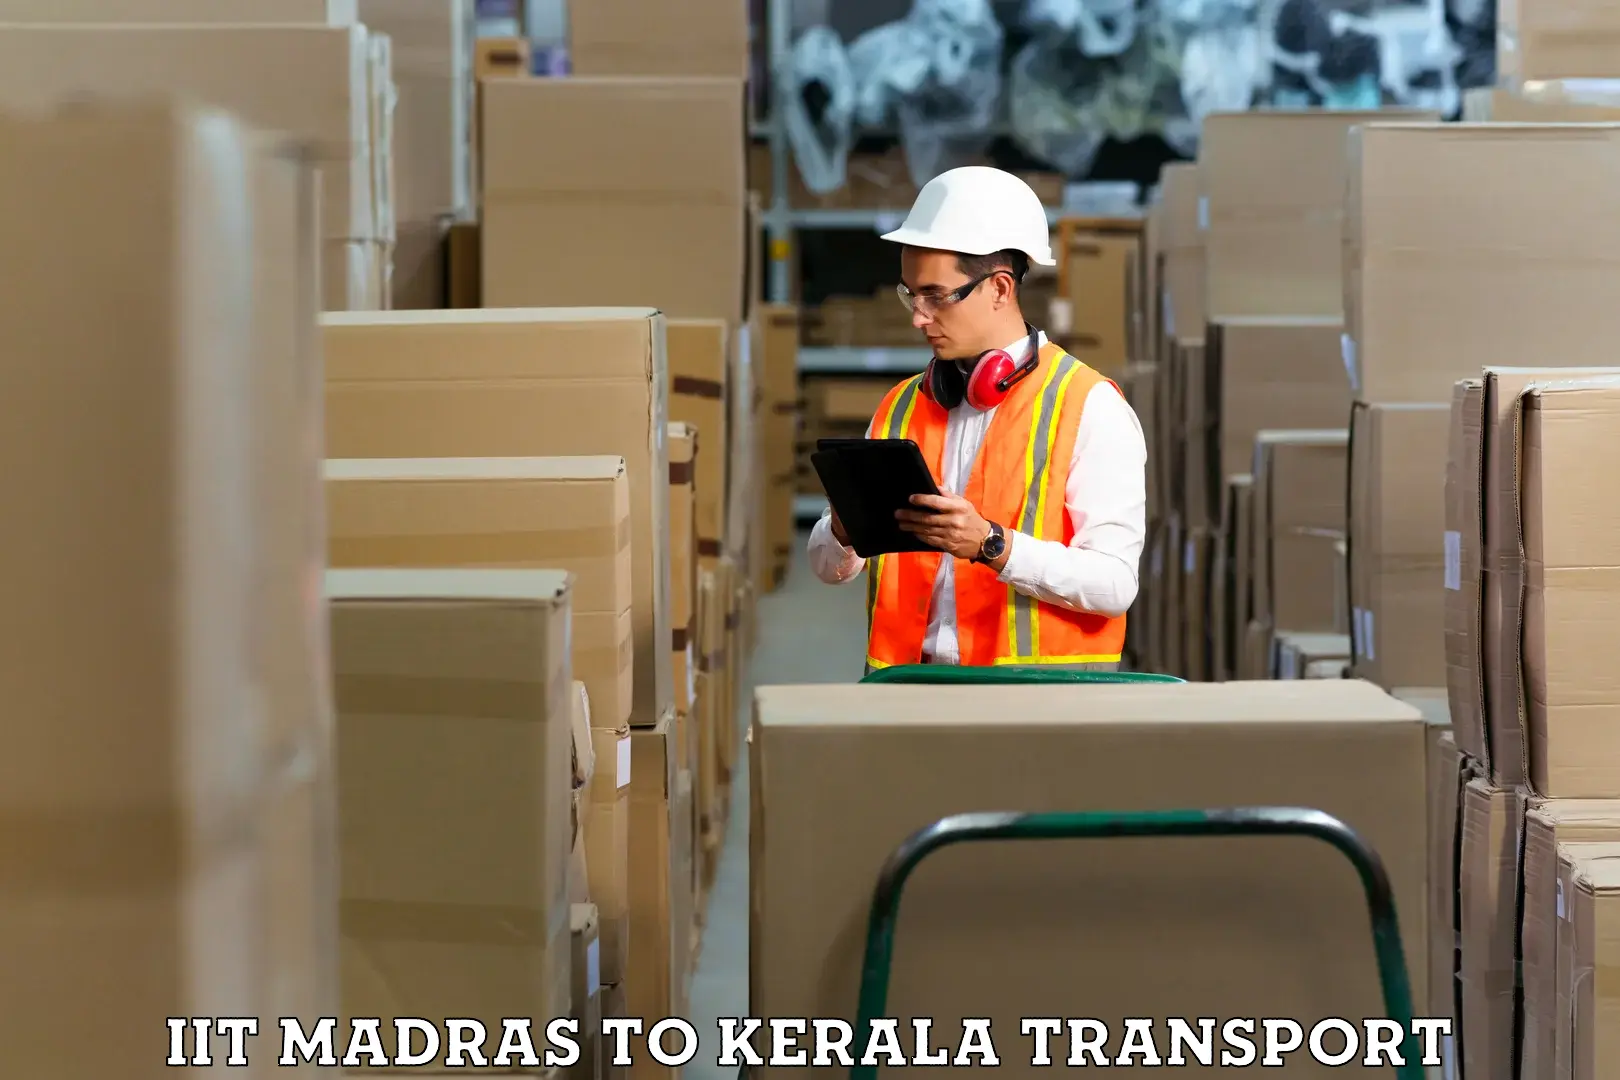 Daily parcel service transport IIT Madras to Payyanur